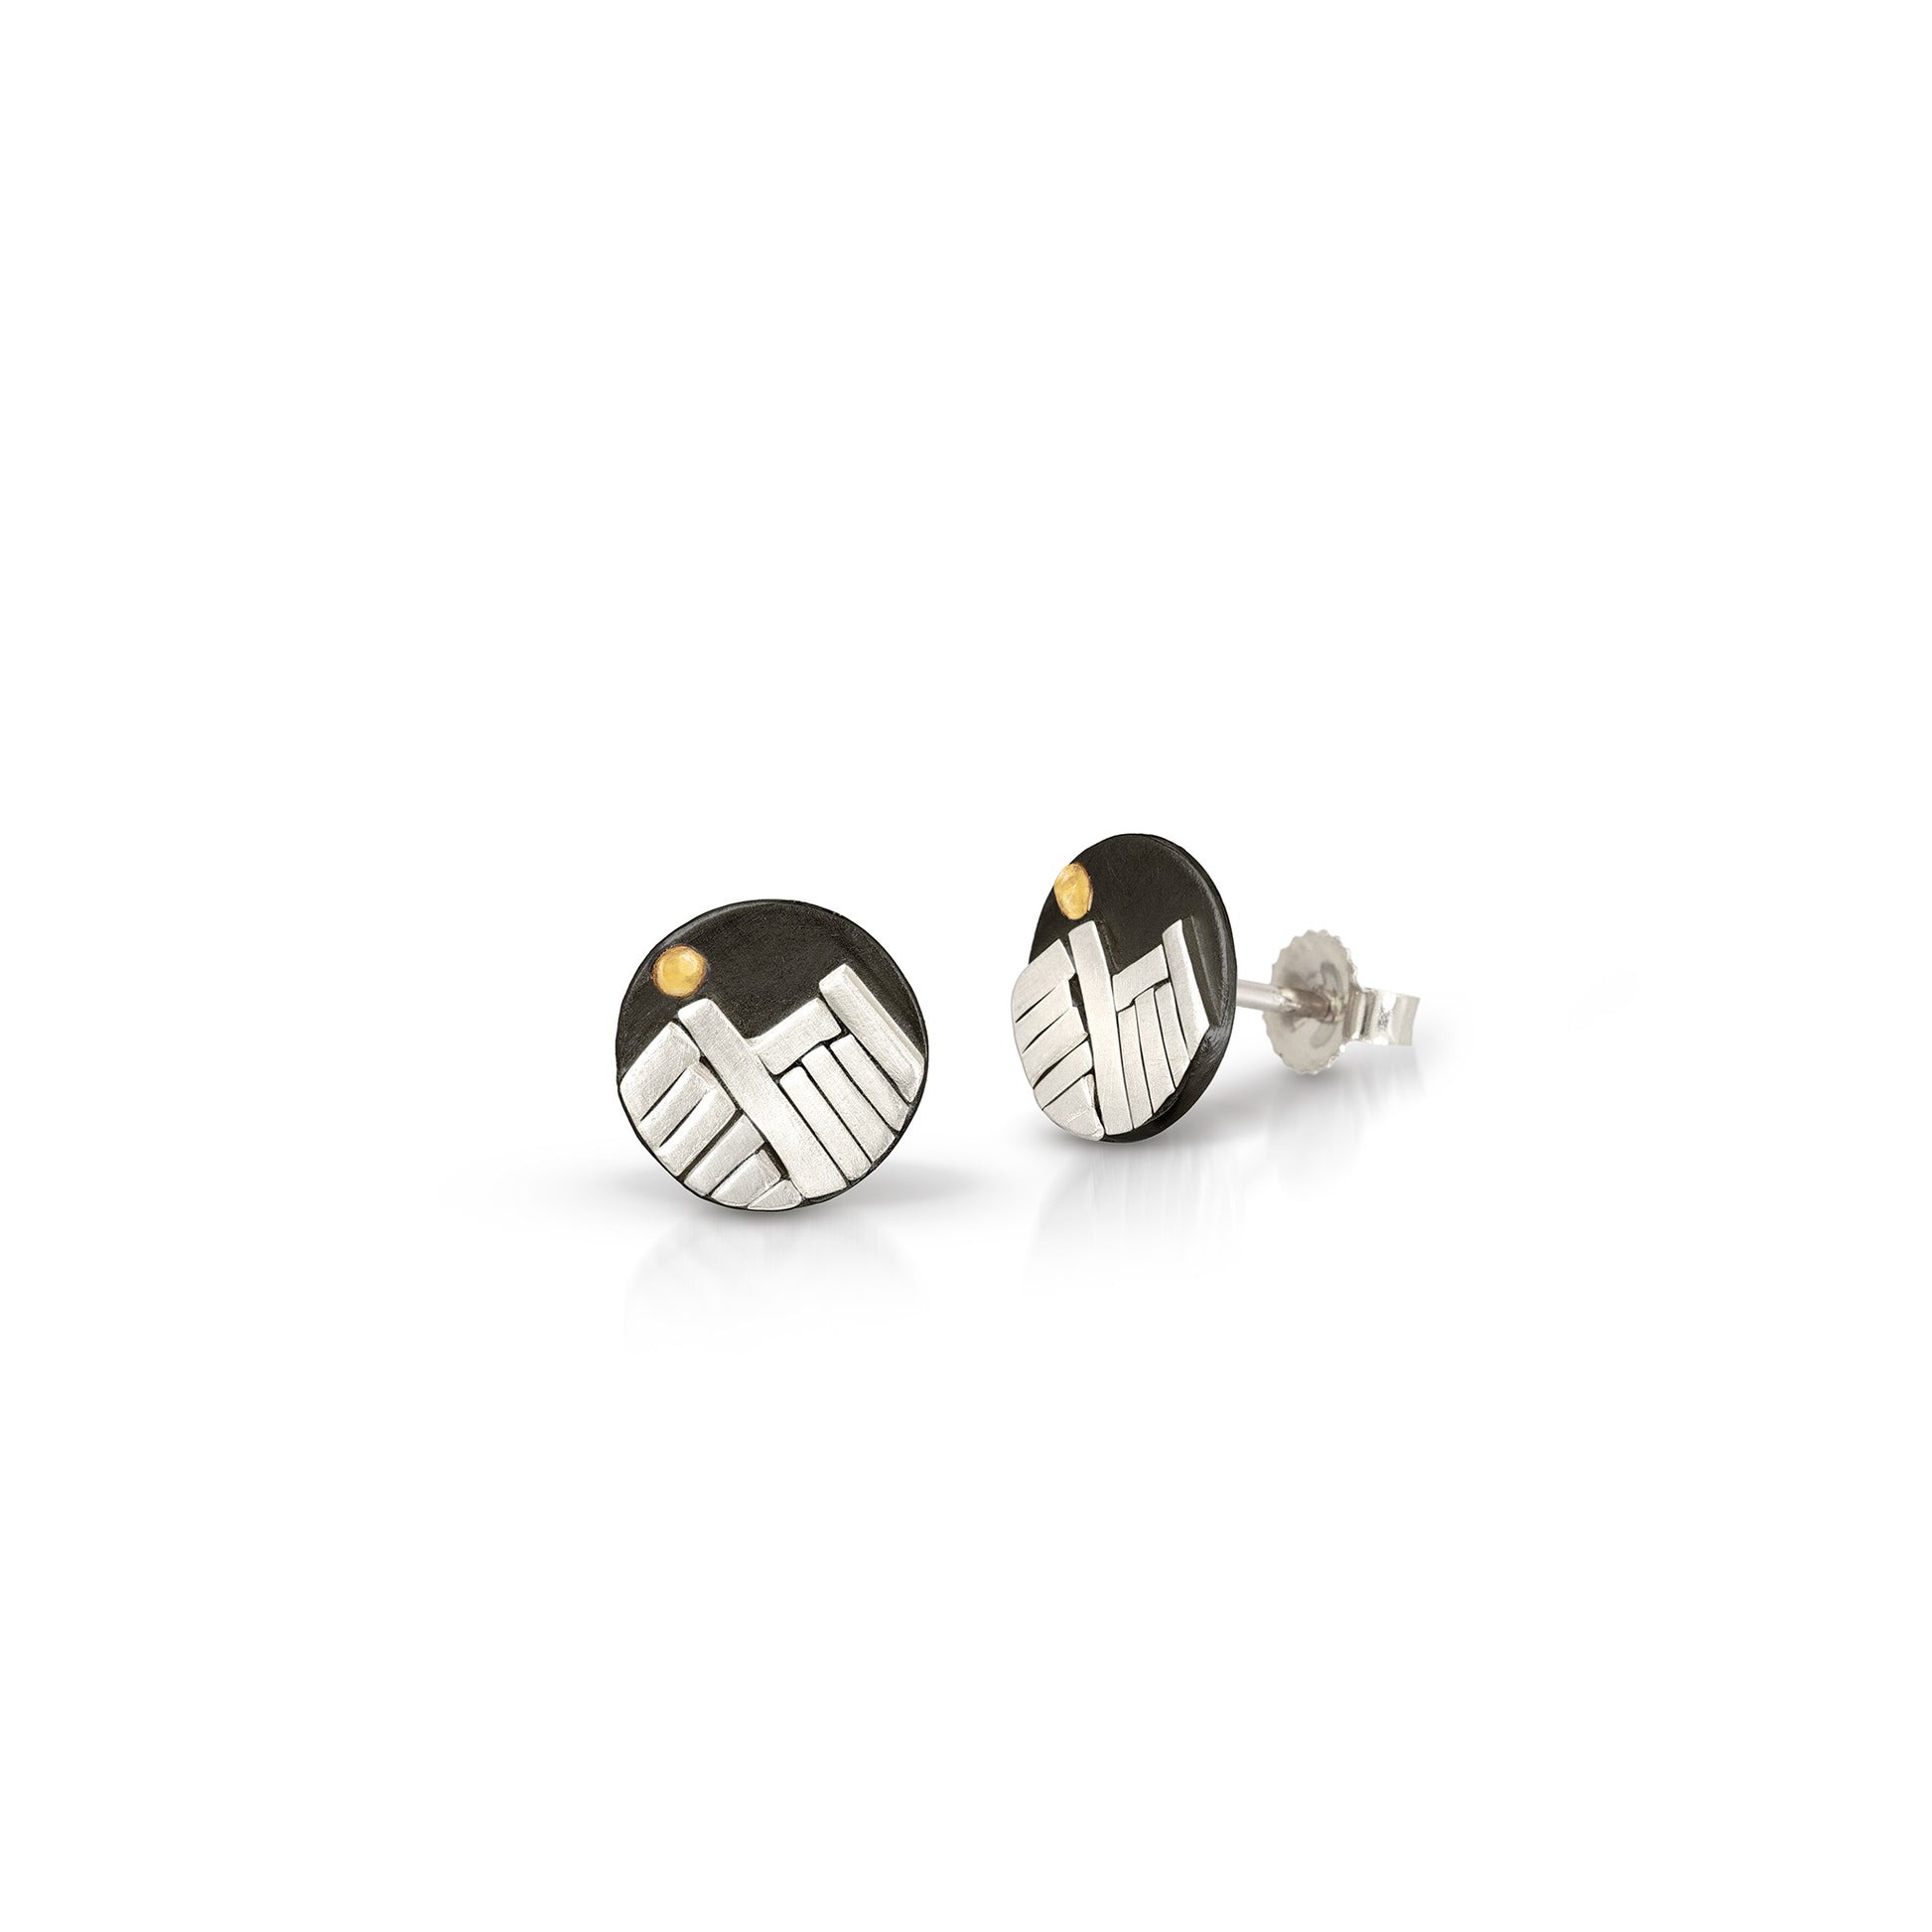 Mountain stud earrings with gold moons